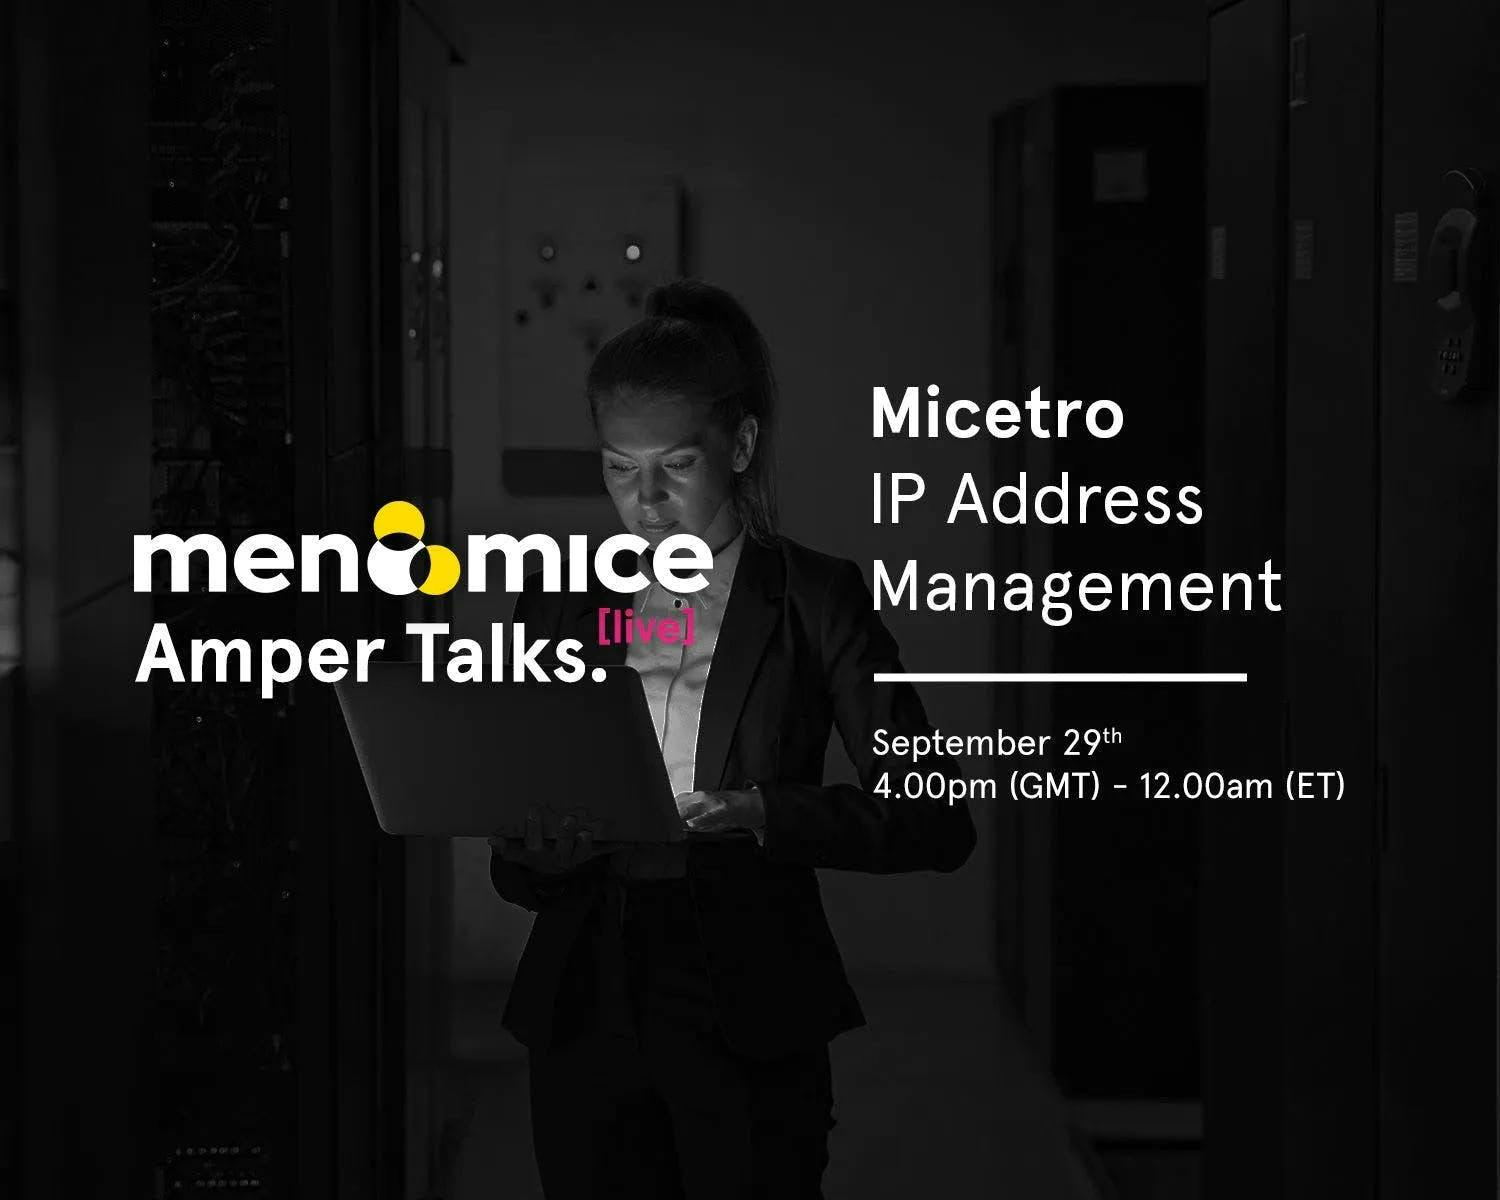 IP Address Management with Micetro